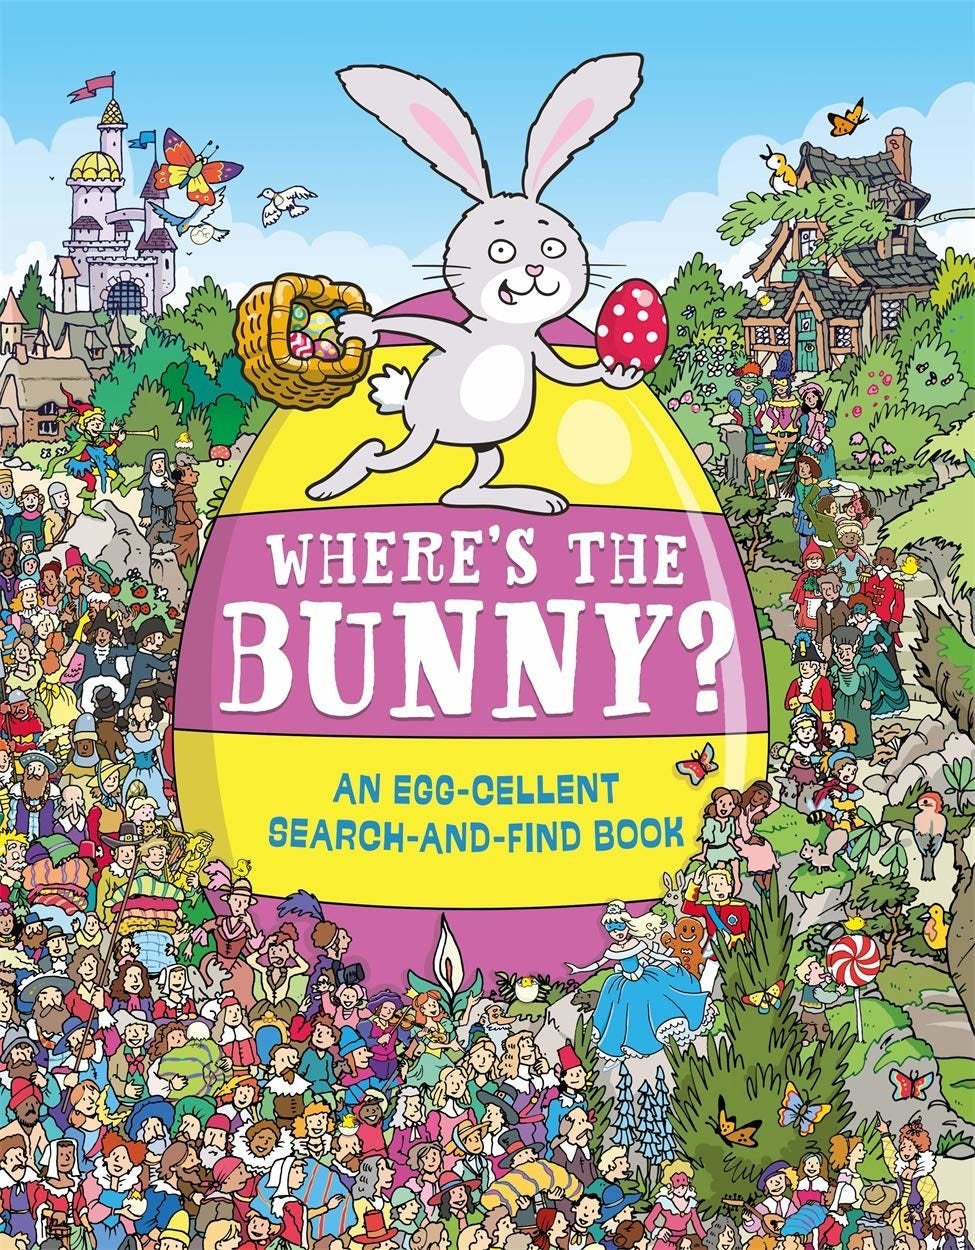 Where’s The Bunny? By Chuck Whelon, represented by Beehive Illustration